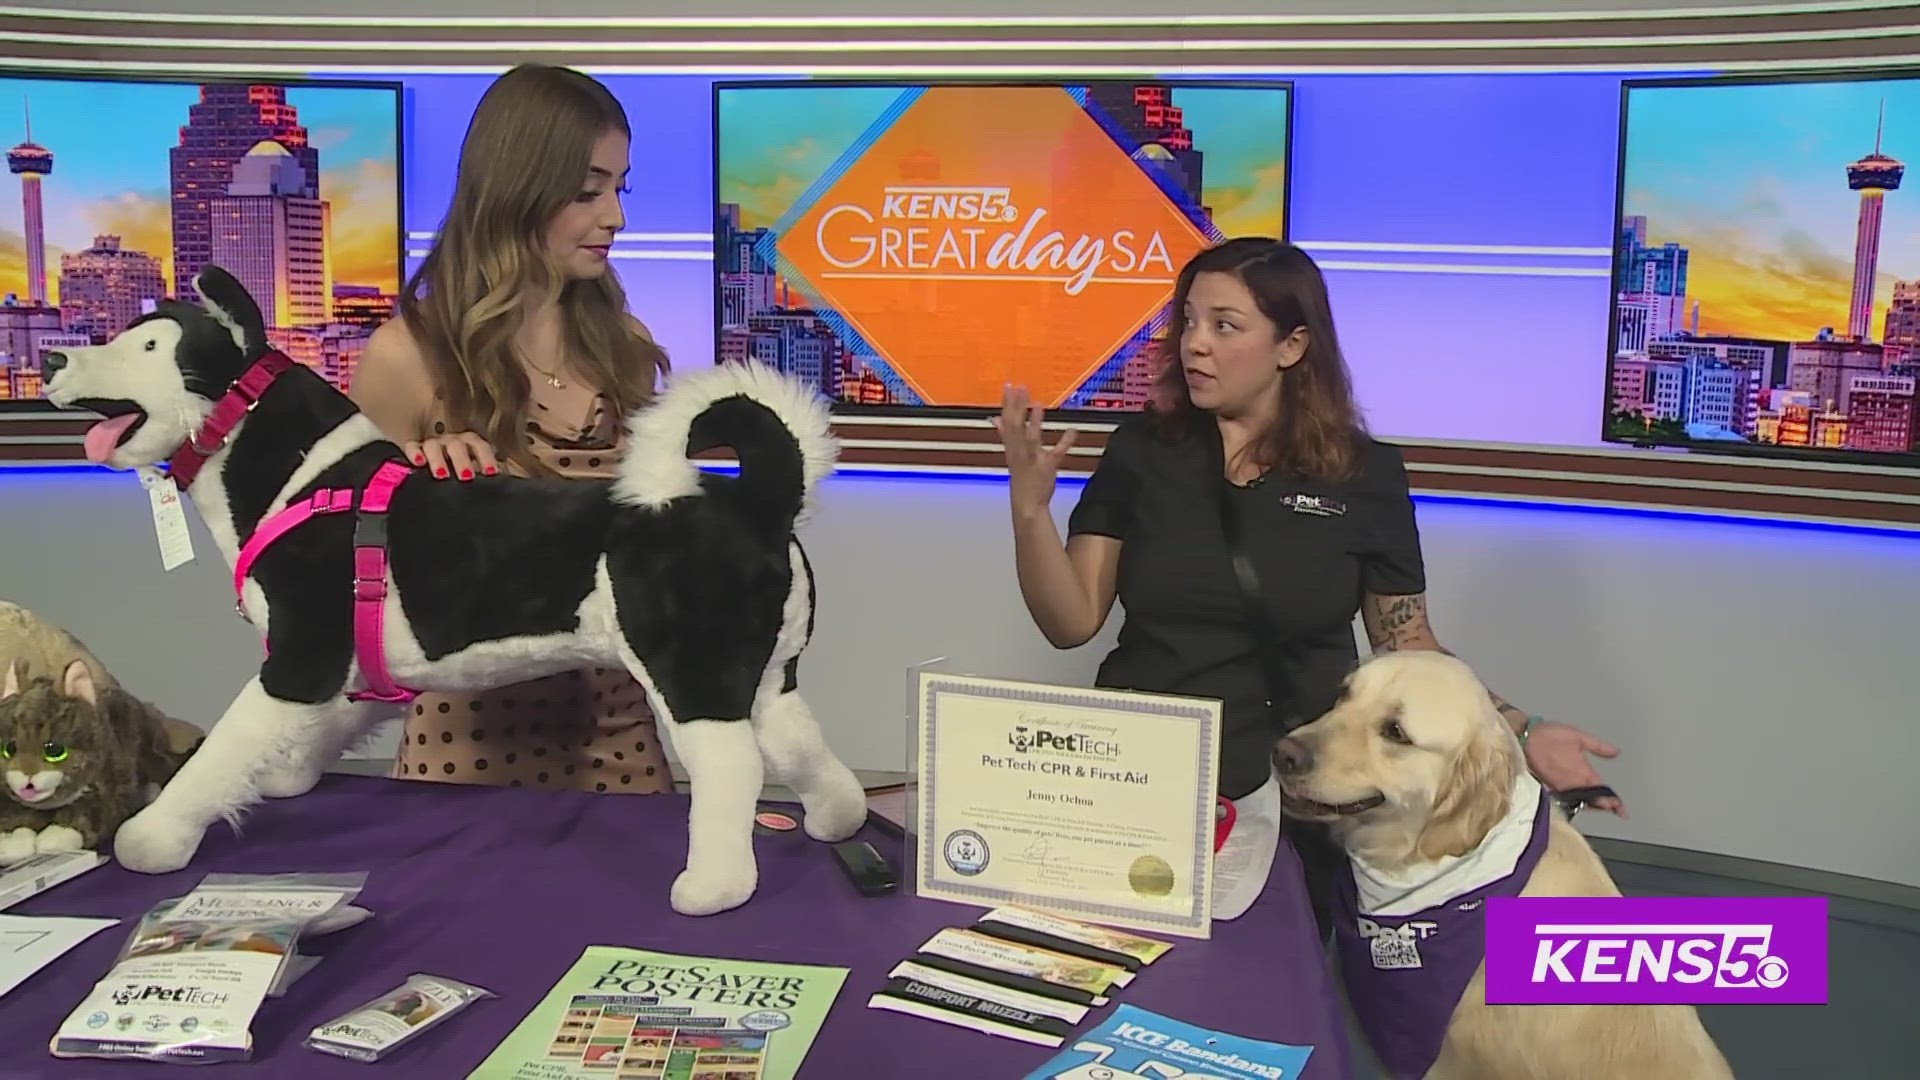 Jessica Davis with Arfordable Dog Training gives us great advice on how to keep pets safe this summer, with special guest, Diego!